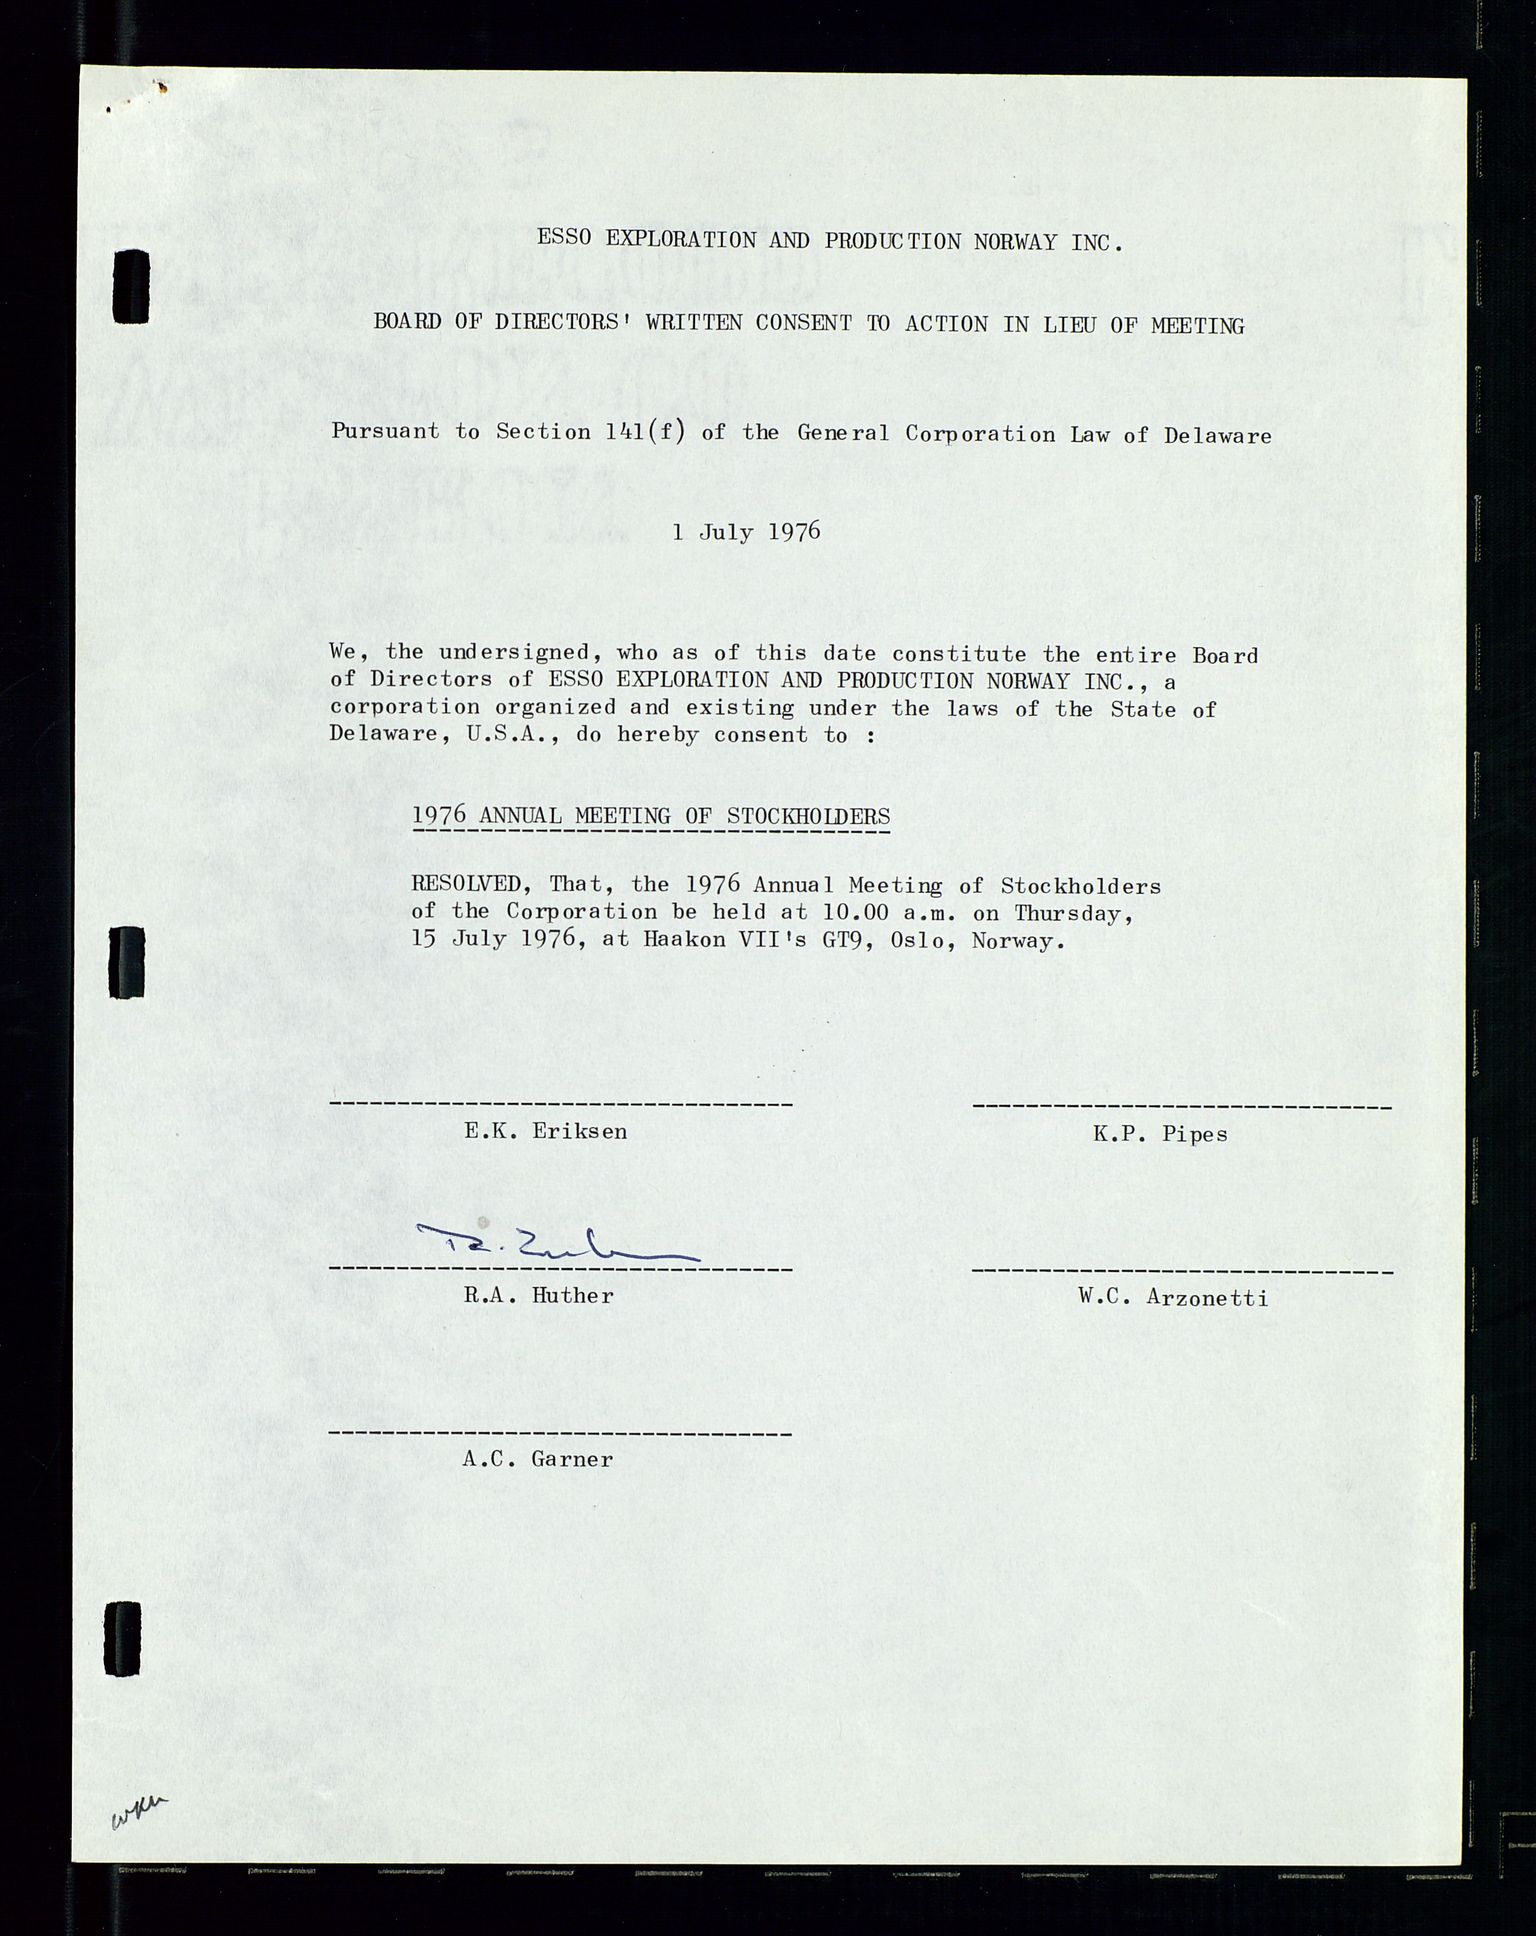 Pa 1512 - Esso Exploration and Production Norway Inc., SAST/A-101917/A/Aa/L0001/0002: Styredokumenter / Corporate records, Board meeting minutes, Agreements, Stocholder meetings, 1975-1979, s. 30